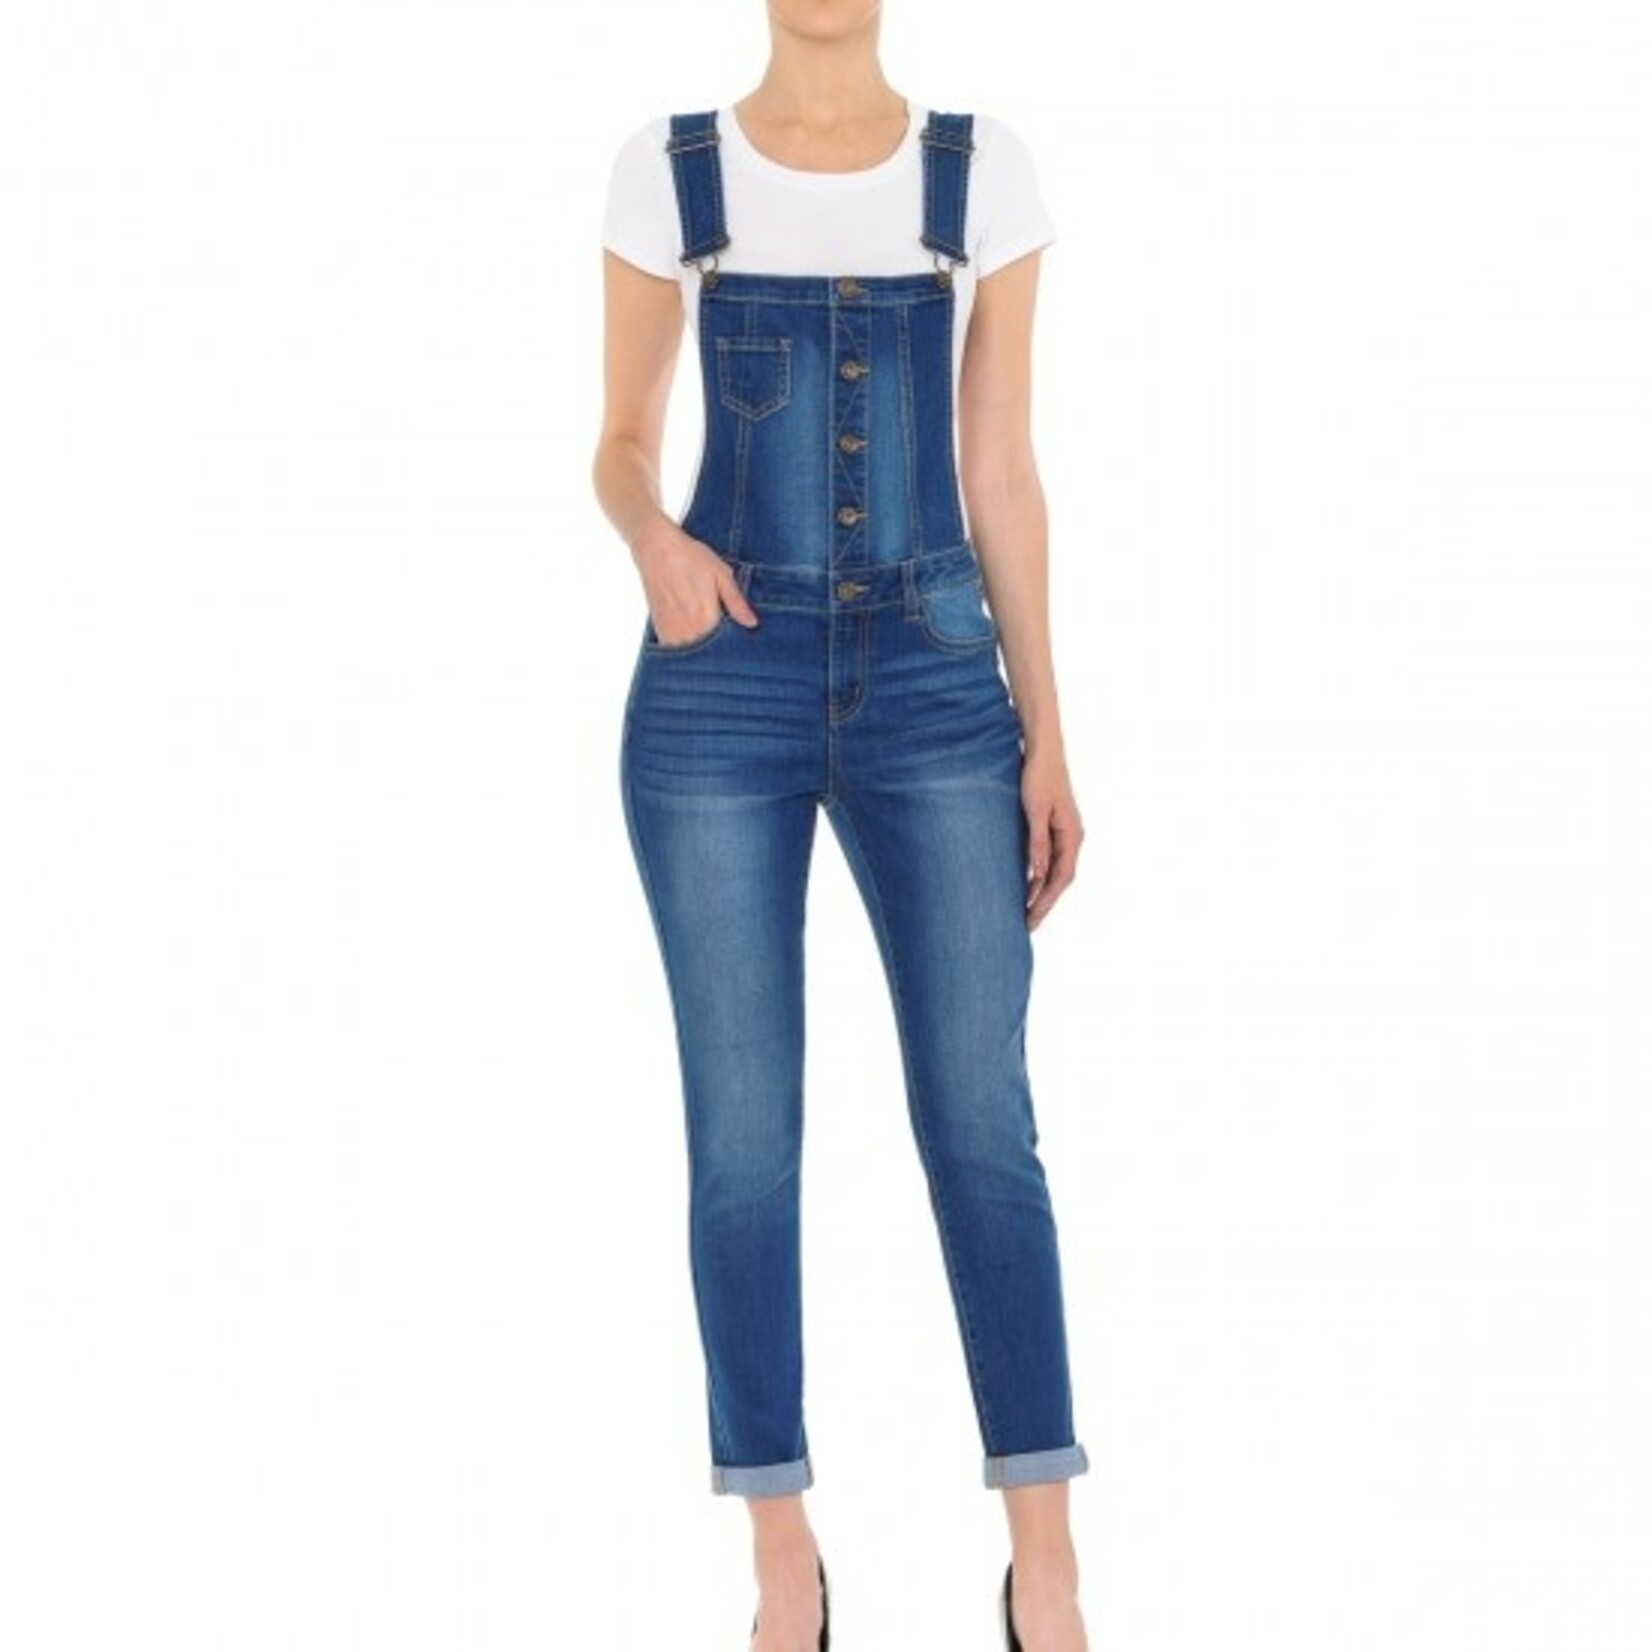 Wax Jeans WAX JEANS Women Overall Pants 90166